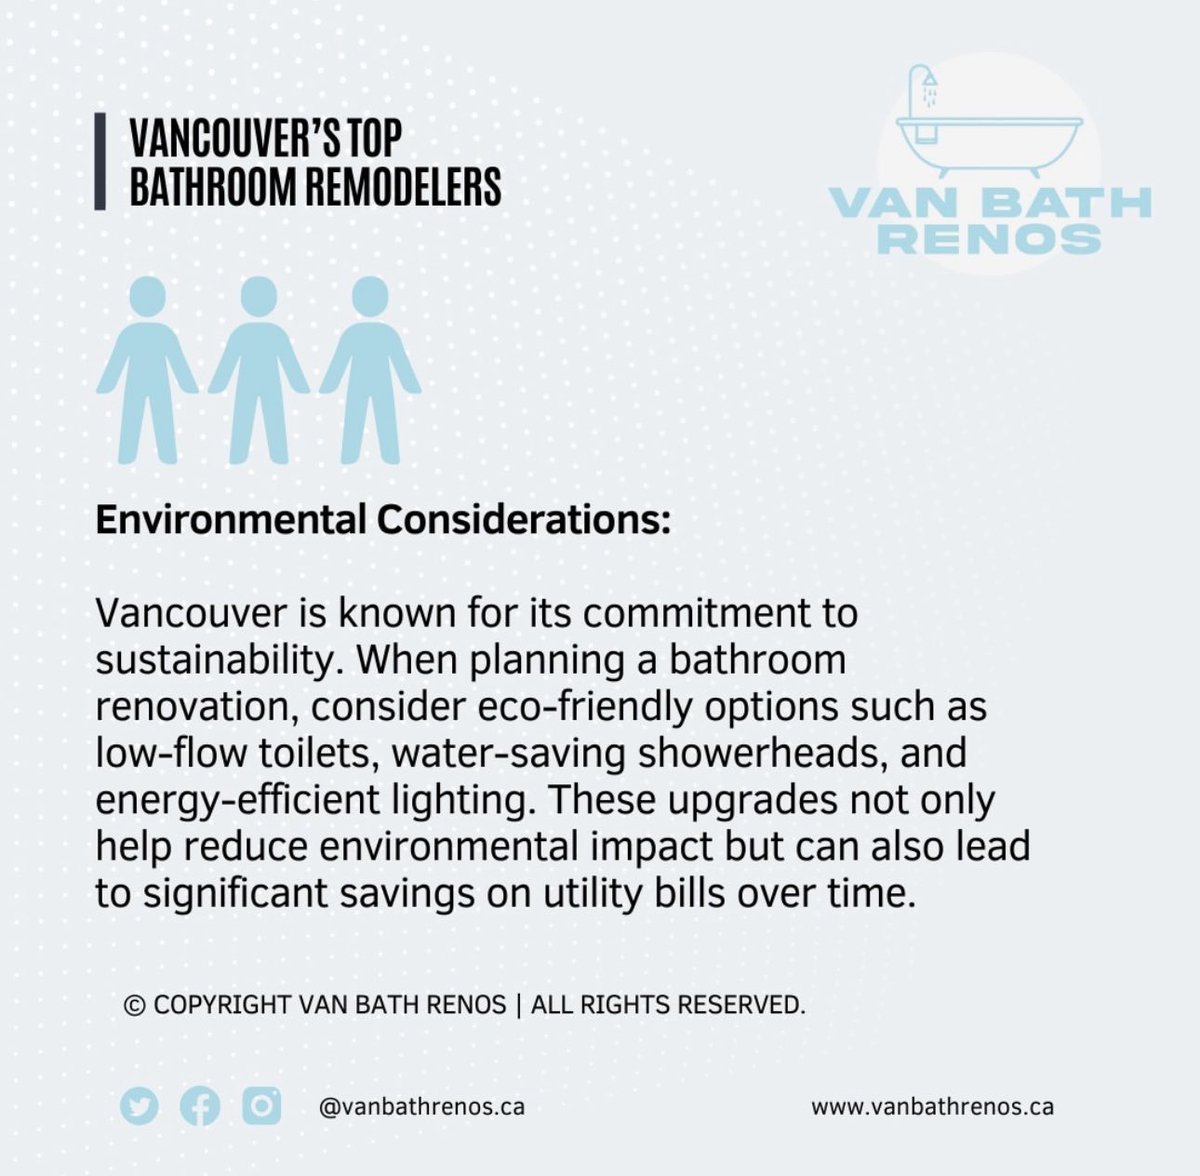 Go green with your bathroom renovation! 🌱

Eco-friendly upgrades like low-flow fixtures and energy-efficient lighting can save money and the planet. 

#VanBathRenos #EcoFriendly #SustainableLiving #GreenRenovation #EnergyEfficiency #WaterConservation #VancouverEco